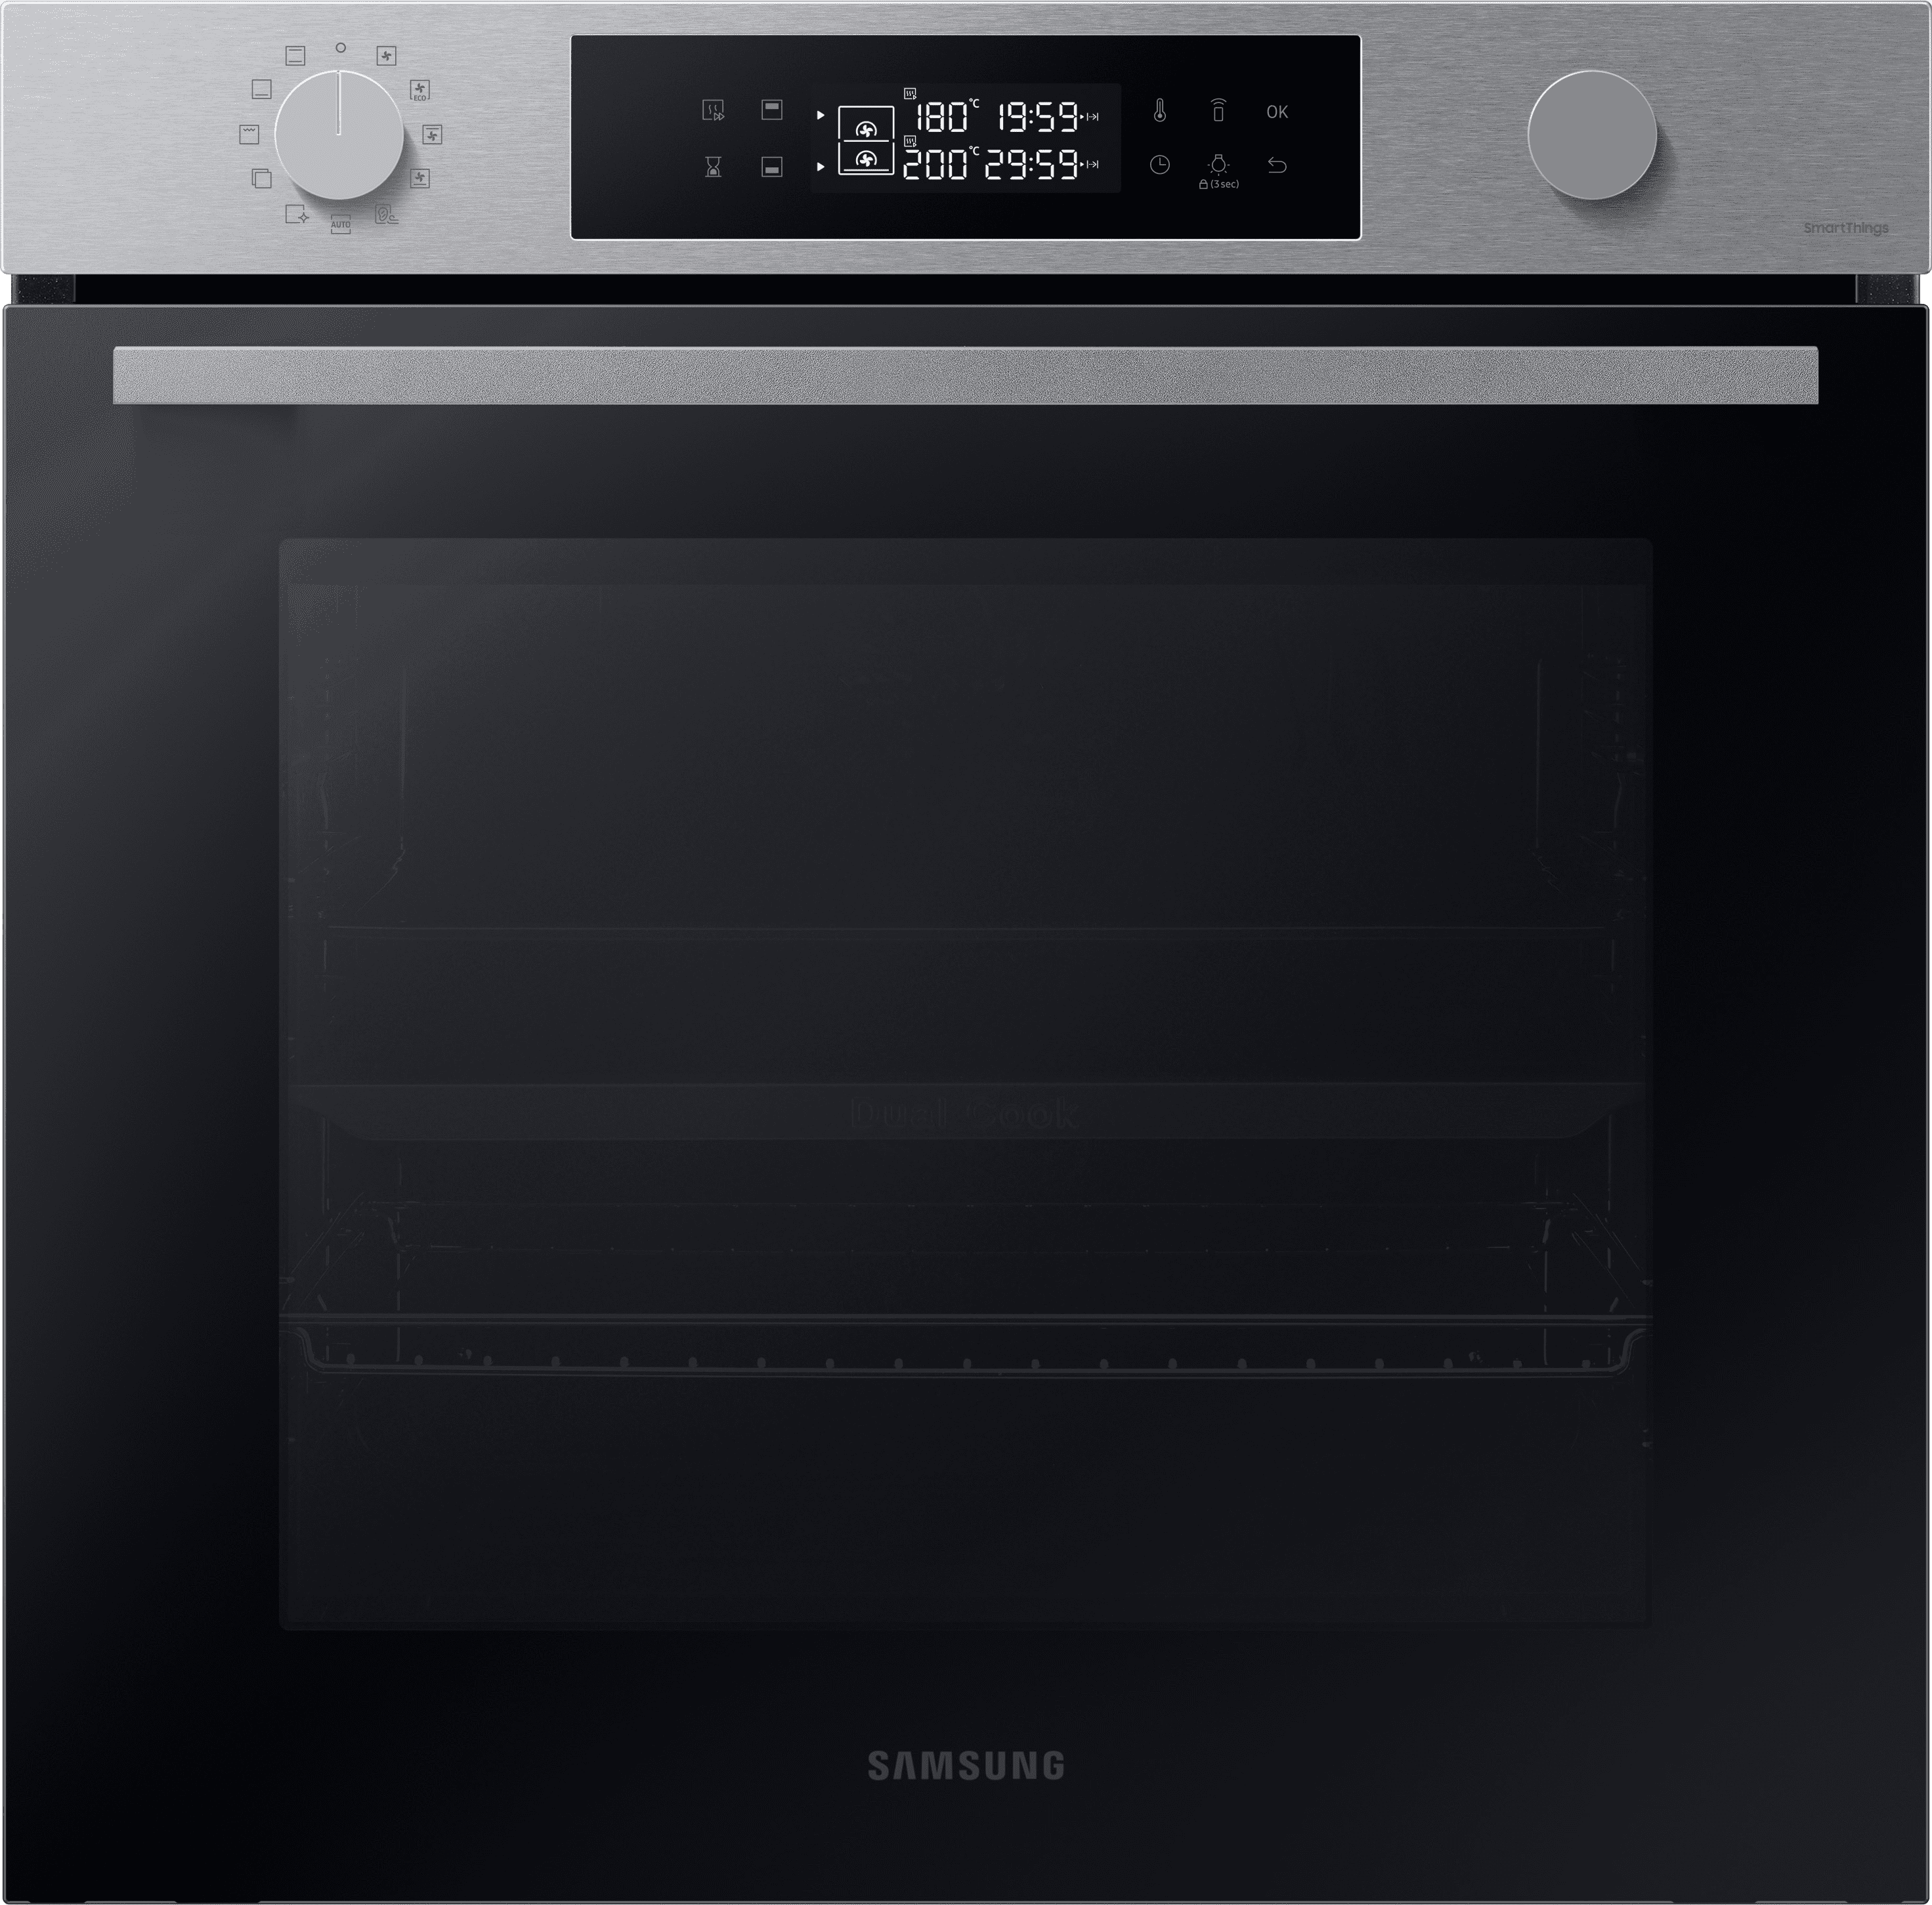 Samsung Series 4 Dual Cook NV7B44205AS Wifi Connected Built In Electric Single Oven - Stainless Steel - A+ Rated, Stainless Steel